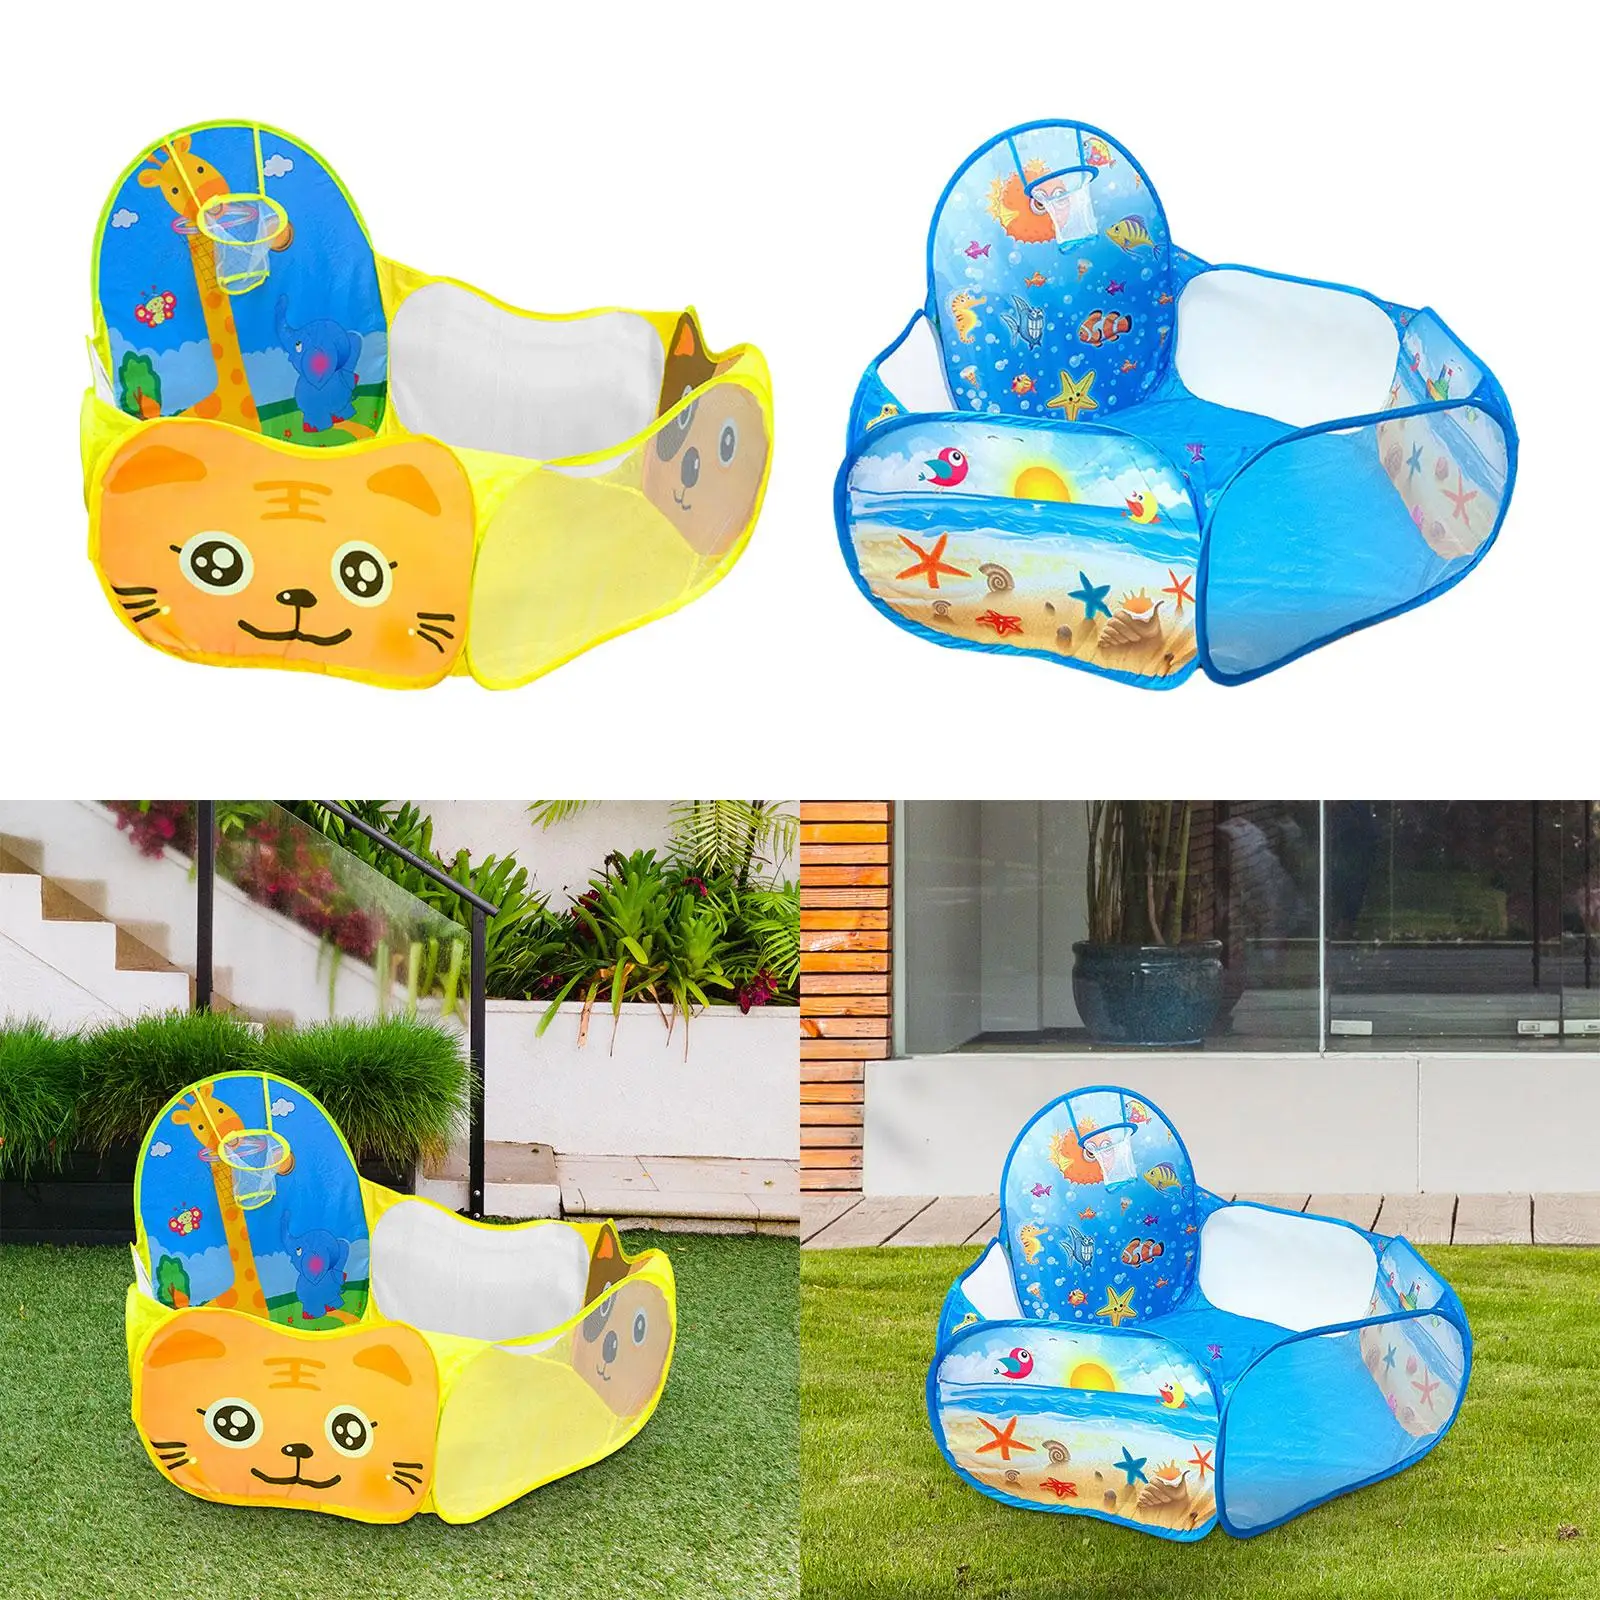 Childrens Ball Play Tent Gift Child Room Decoration Baby Crawl Playpen Toys with Basketball Hoop Foldable Tent for Toddlers